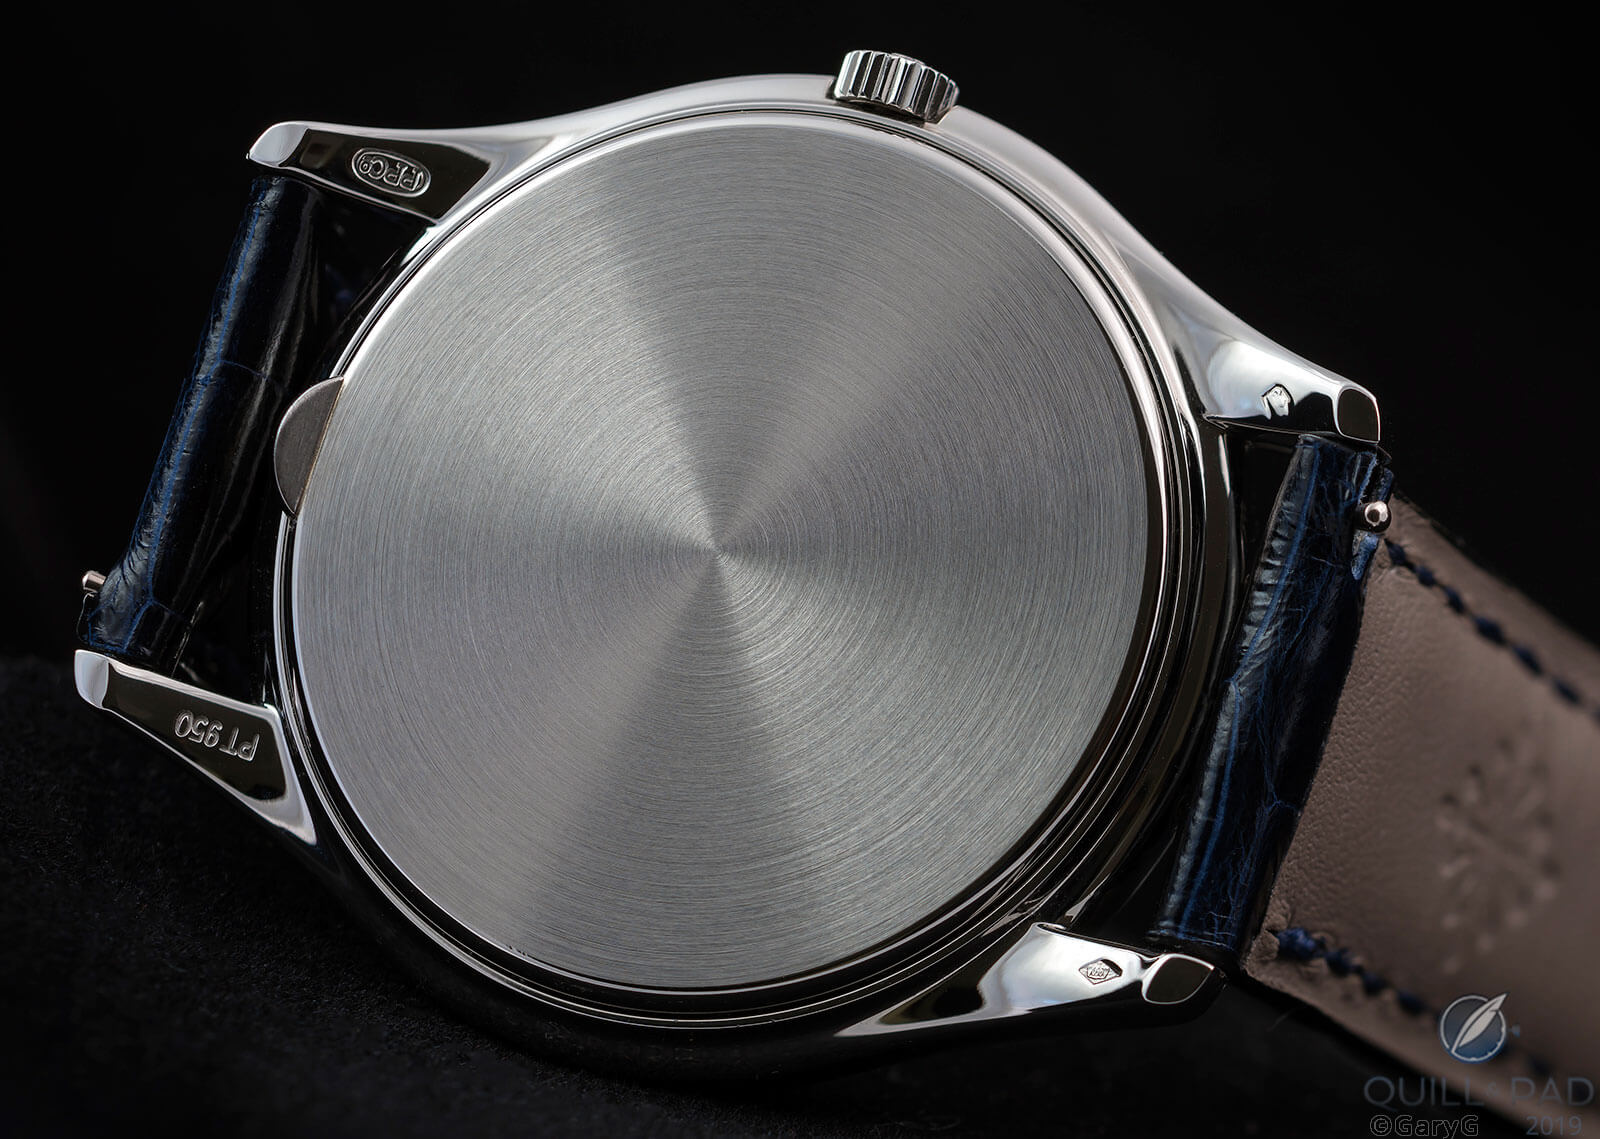 Move along, nothing to see here folks: solid case back, Patek Philippe Reference 3940P